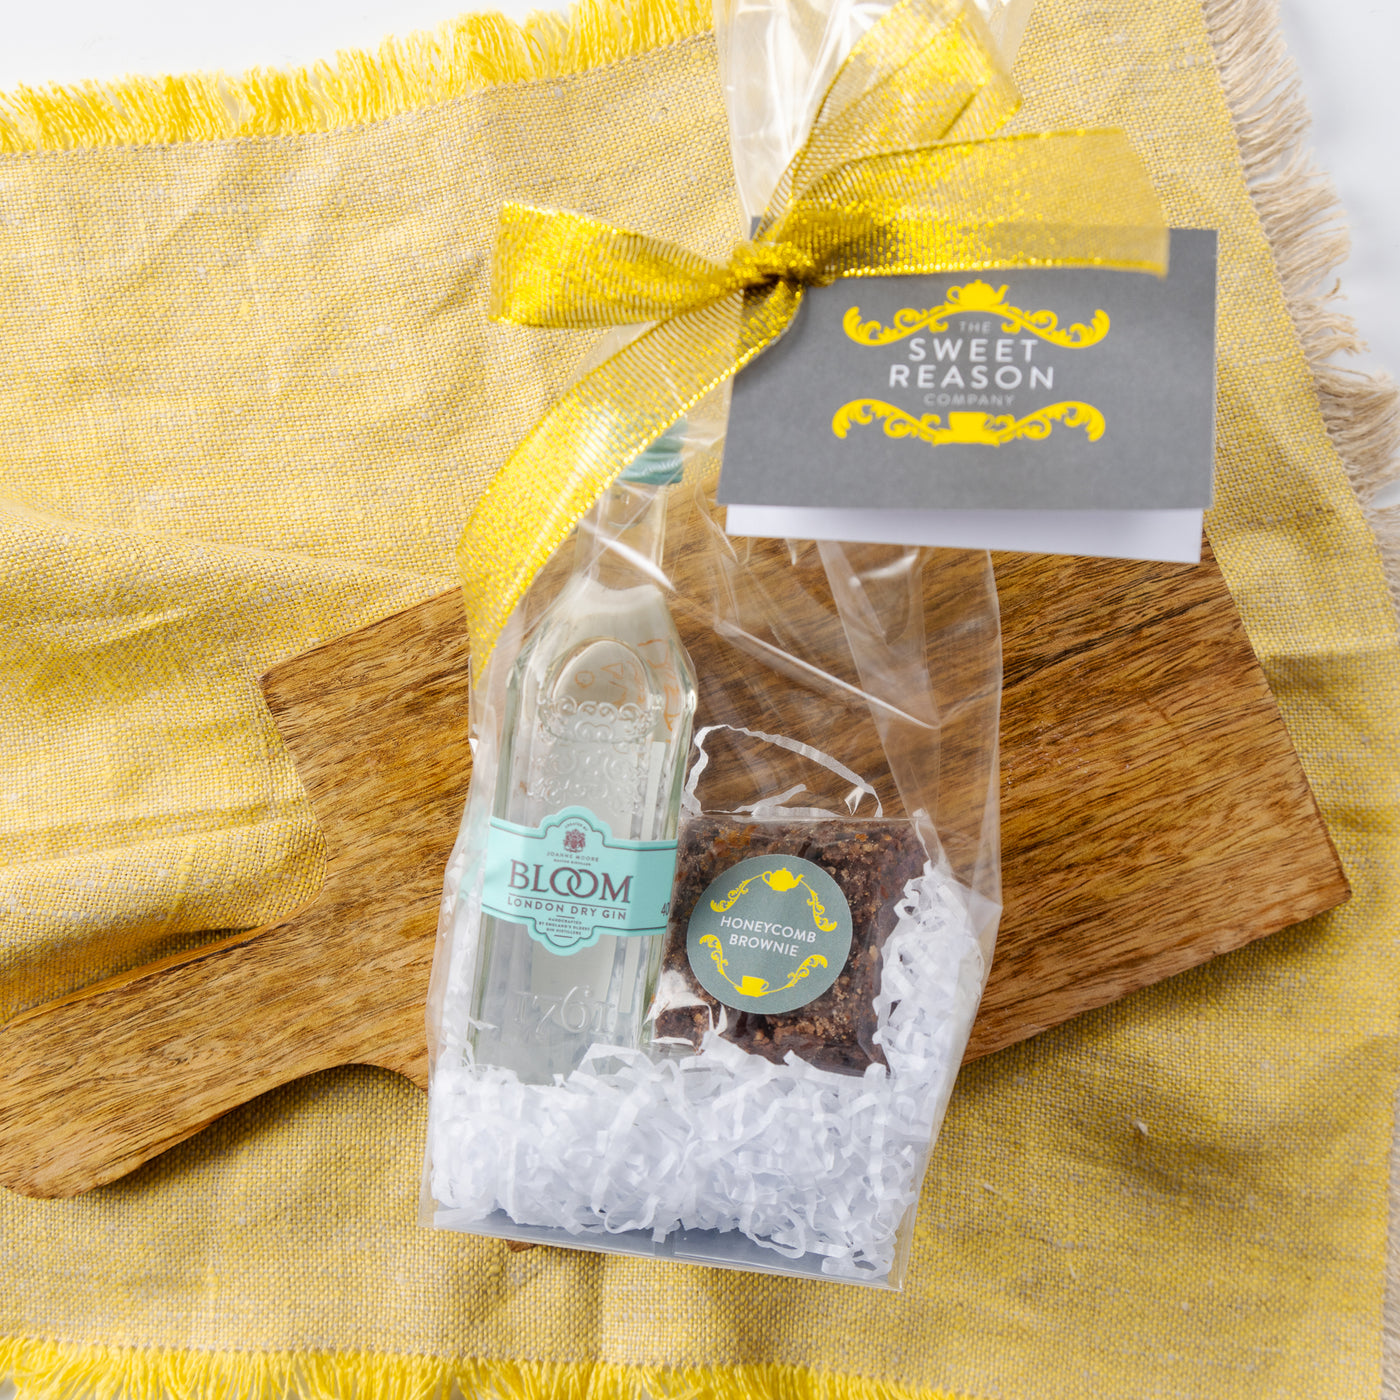 Honeycomb Brownie and Gin Bag